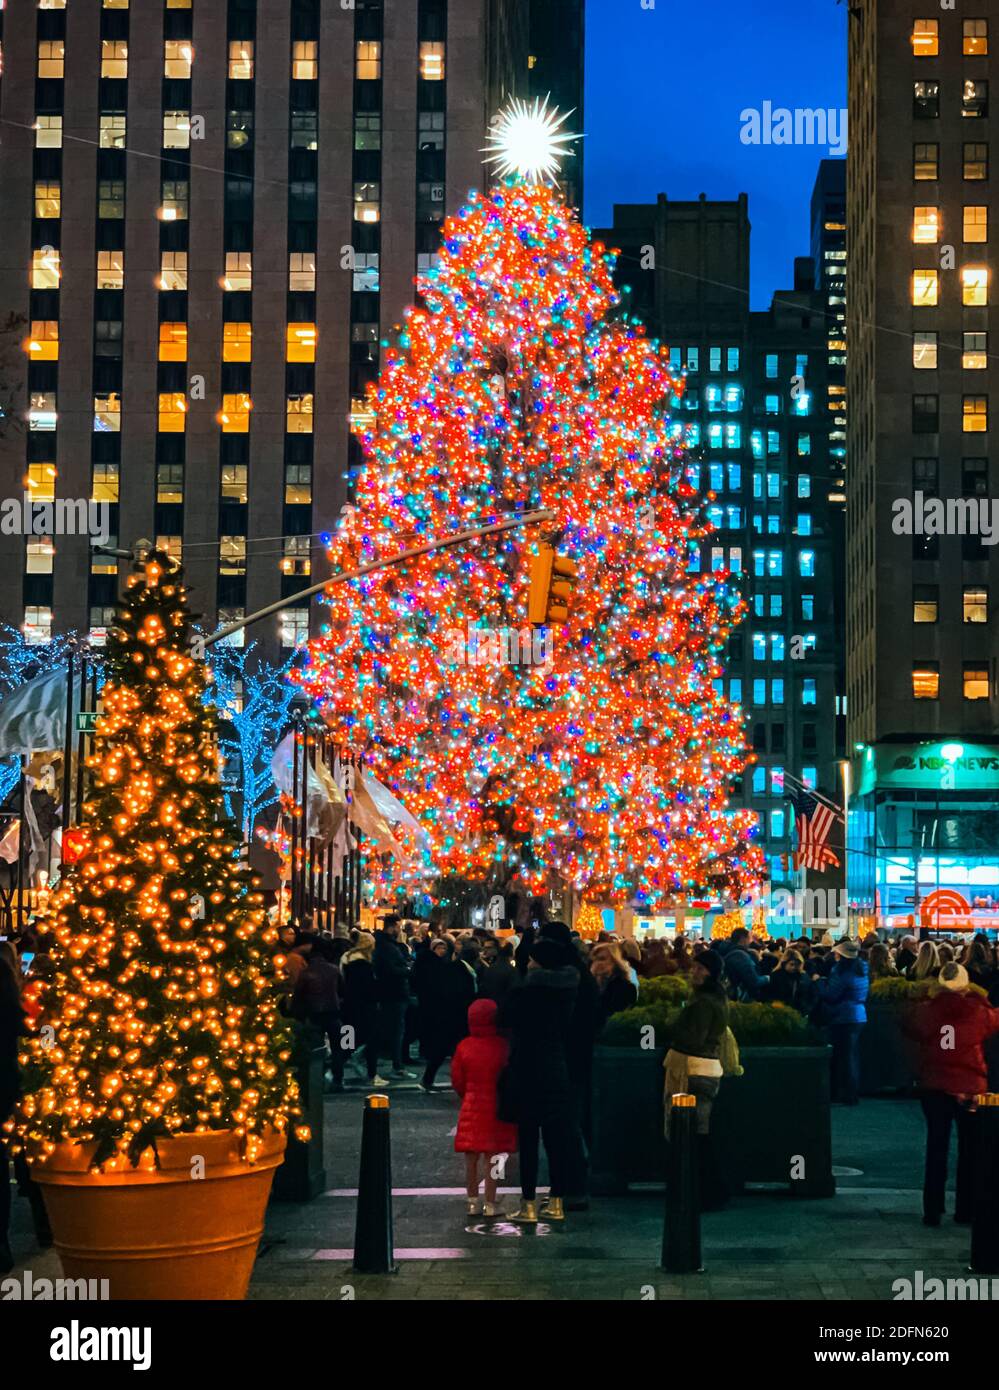 Rockefeller Center Christmas Tree and holiday decorations at the  Rockefeller Plaza in front of the Rockefeller Building in New York City  Stock Photo - Alamy